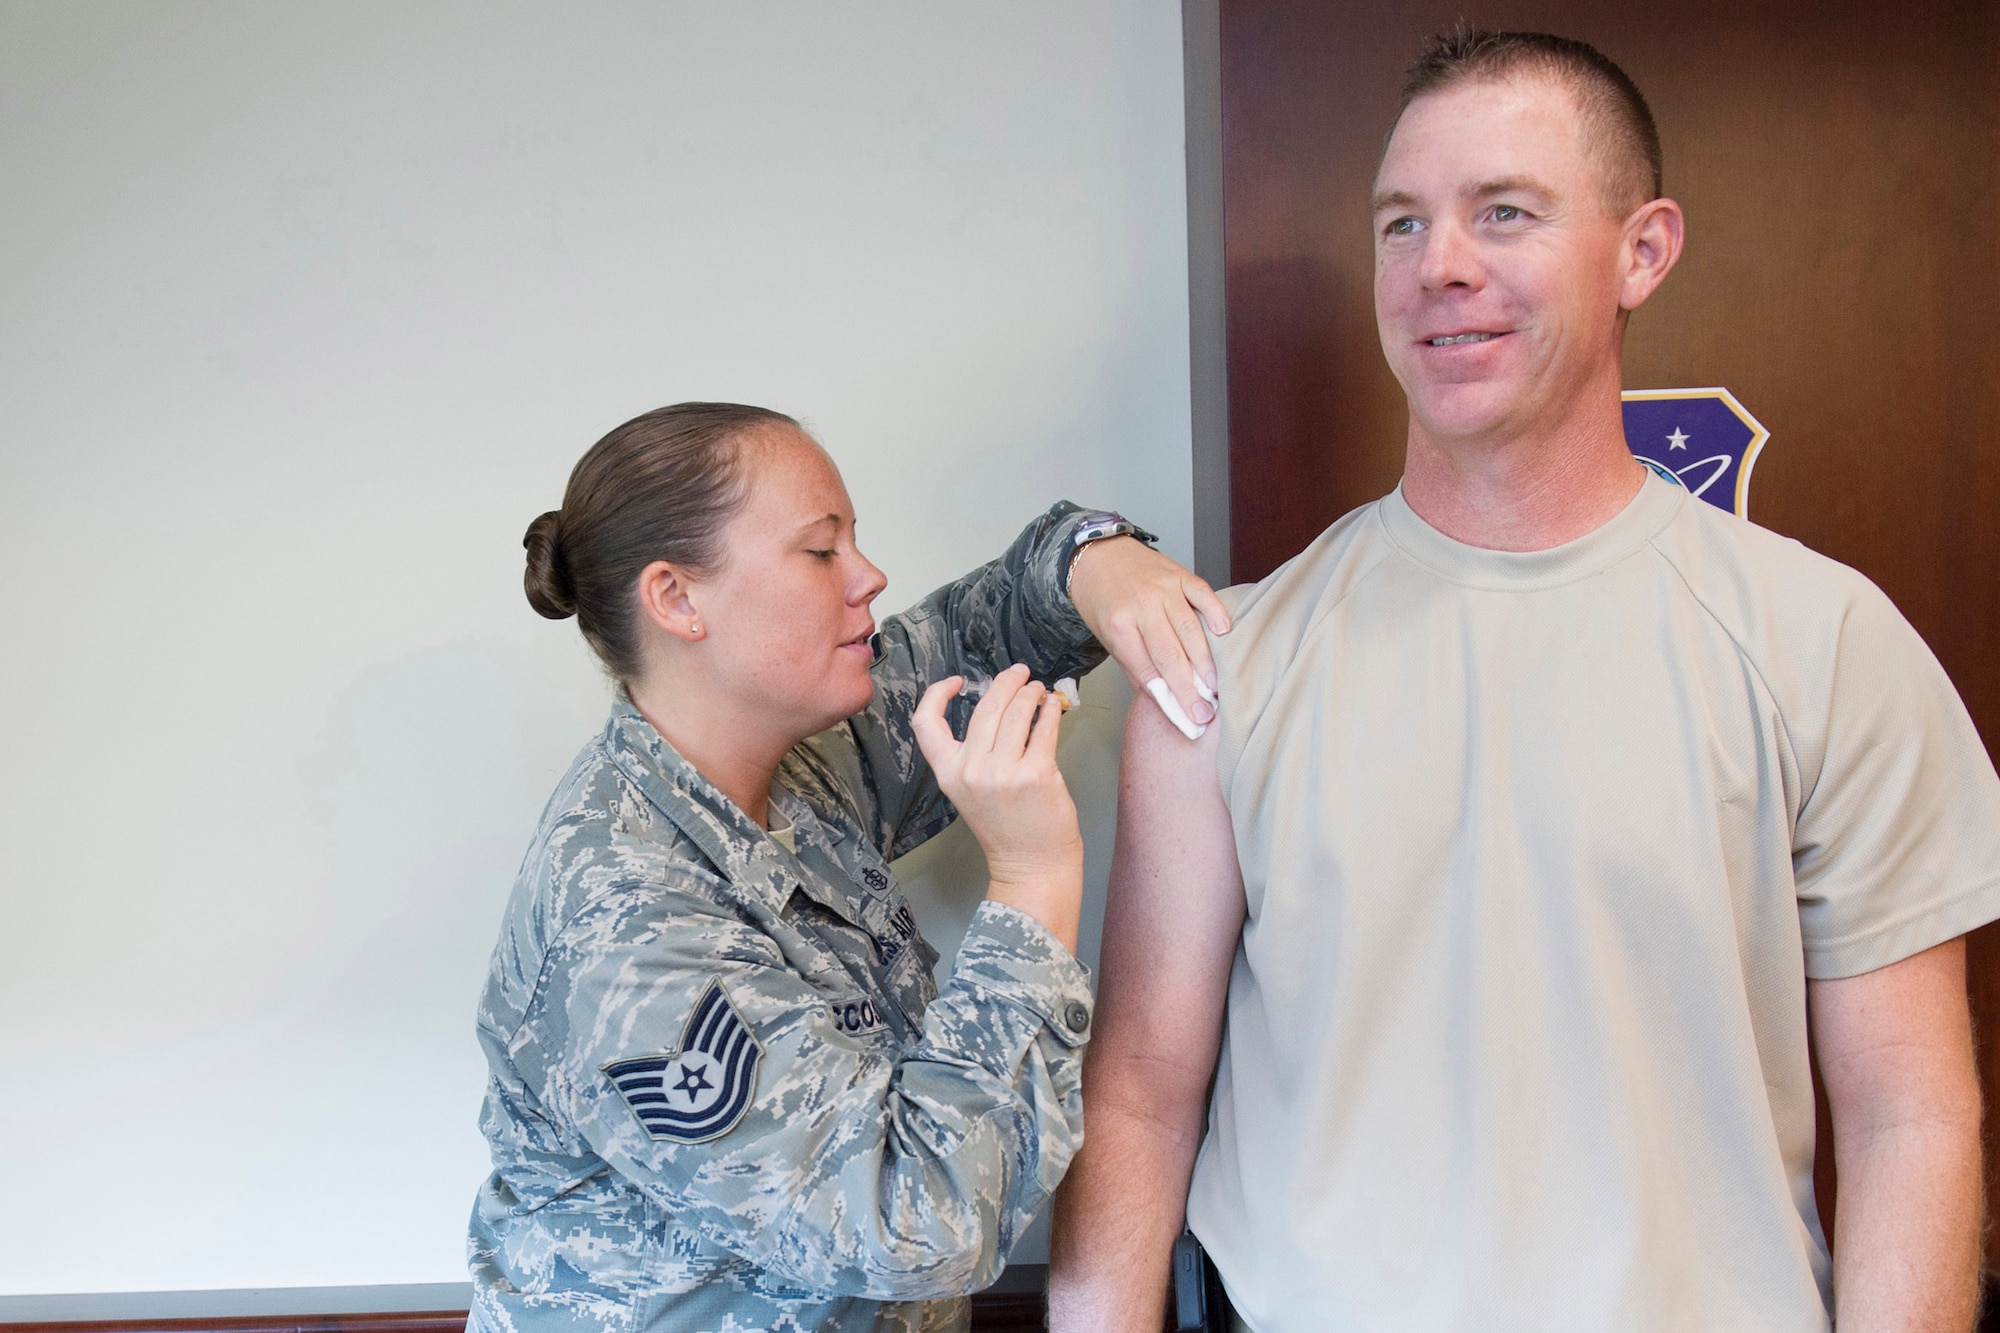 Tech. Sgt. Sara McCoskey, 45th Aerospace Medical Squadron independent duty medical technician, administers an influenza vaccine to Chief Master Sgt. Craig Neri, 45th Space Wing command chief, Oct. 27, 2014, at Patrick Air Force Base, Fla. The influenza vaccine is now available at the 45th Medical Group Allergy and Immunization Clinic. (U.S. Air Force photo/Matthew Jurgens/Released) 